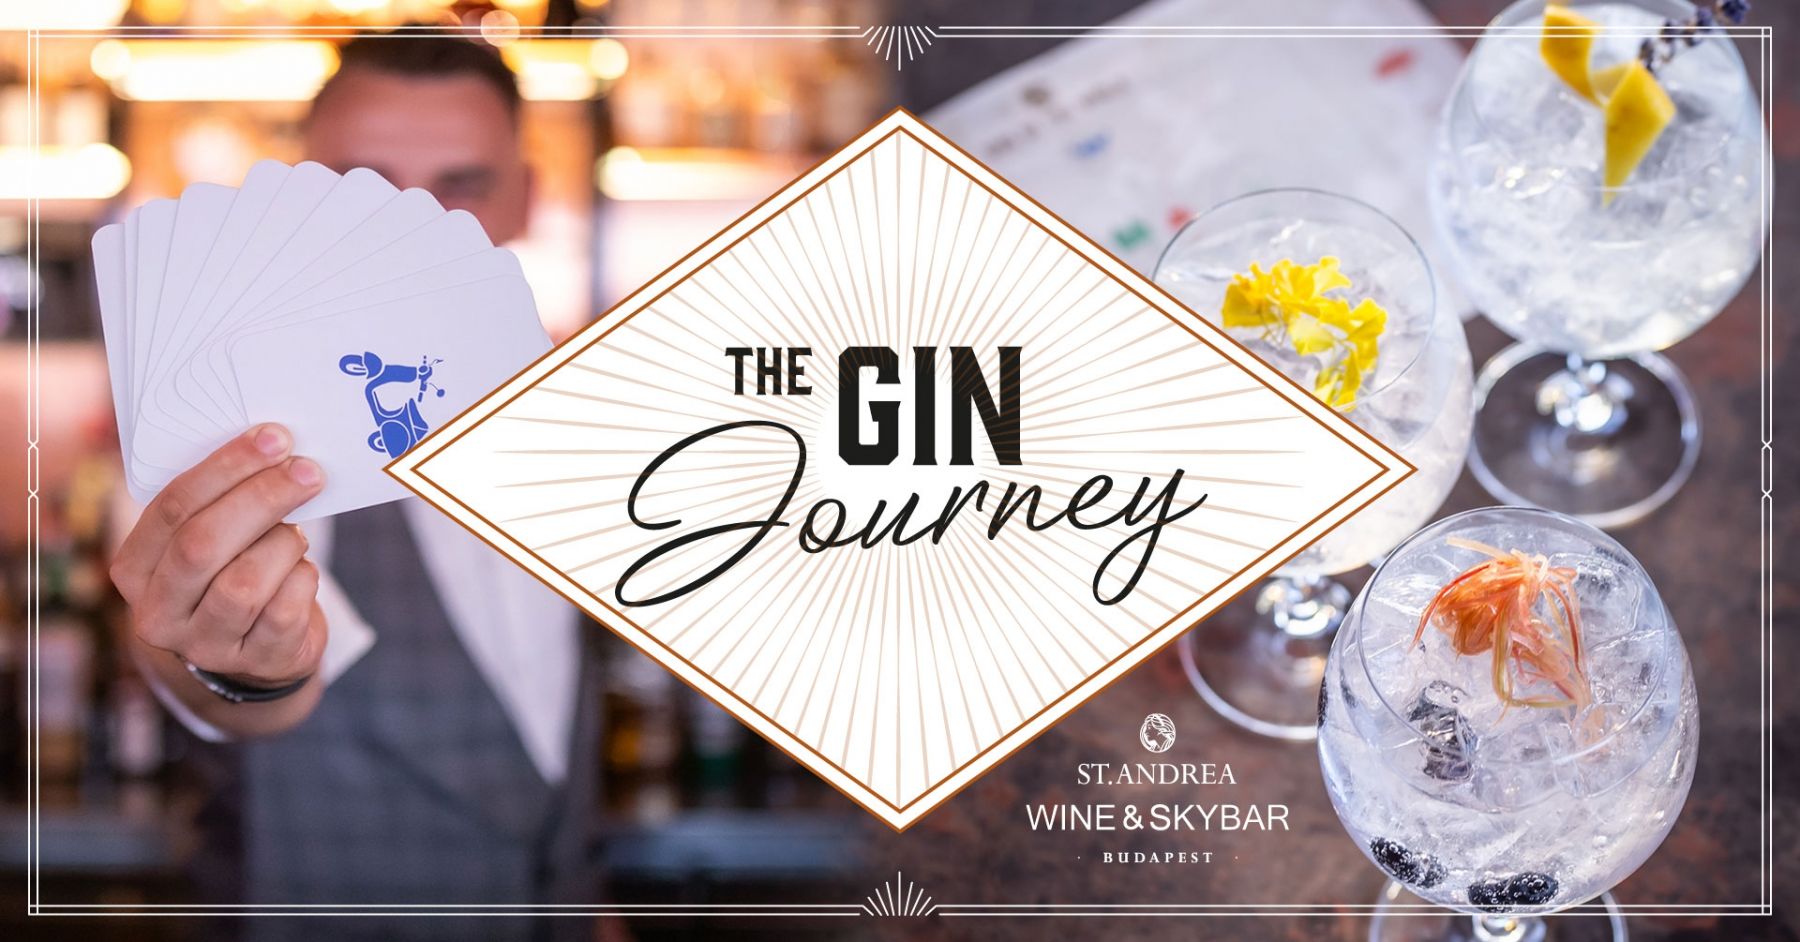 The Gin Journey by St. Andrea Wine&Skybar